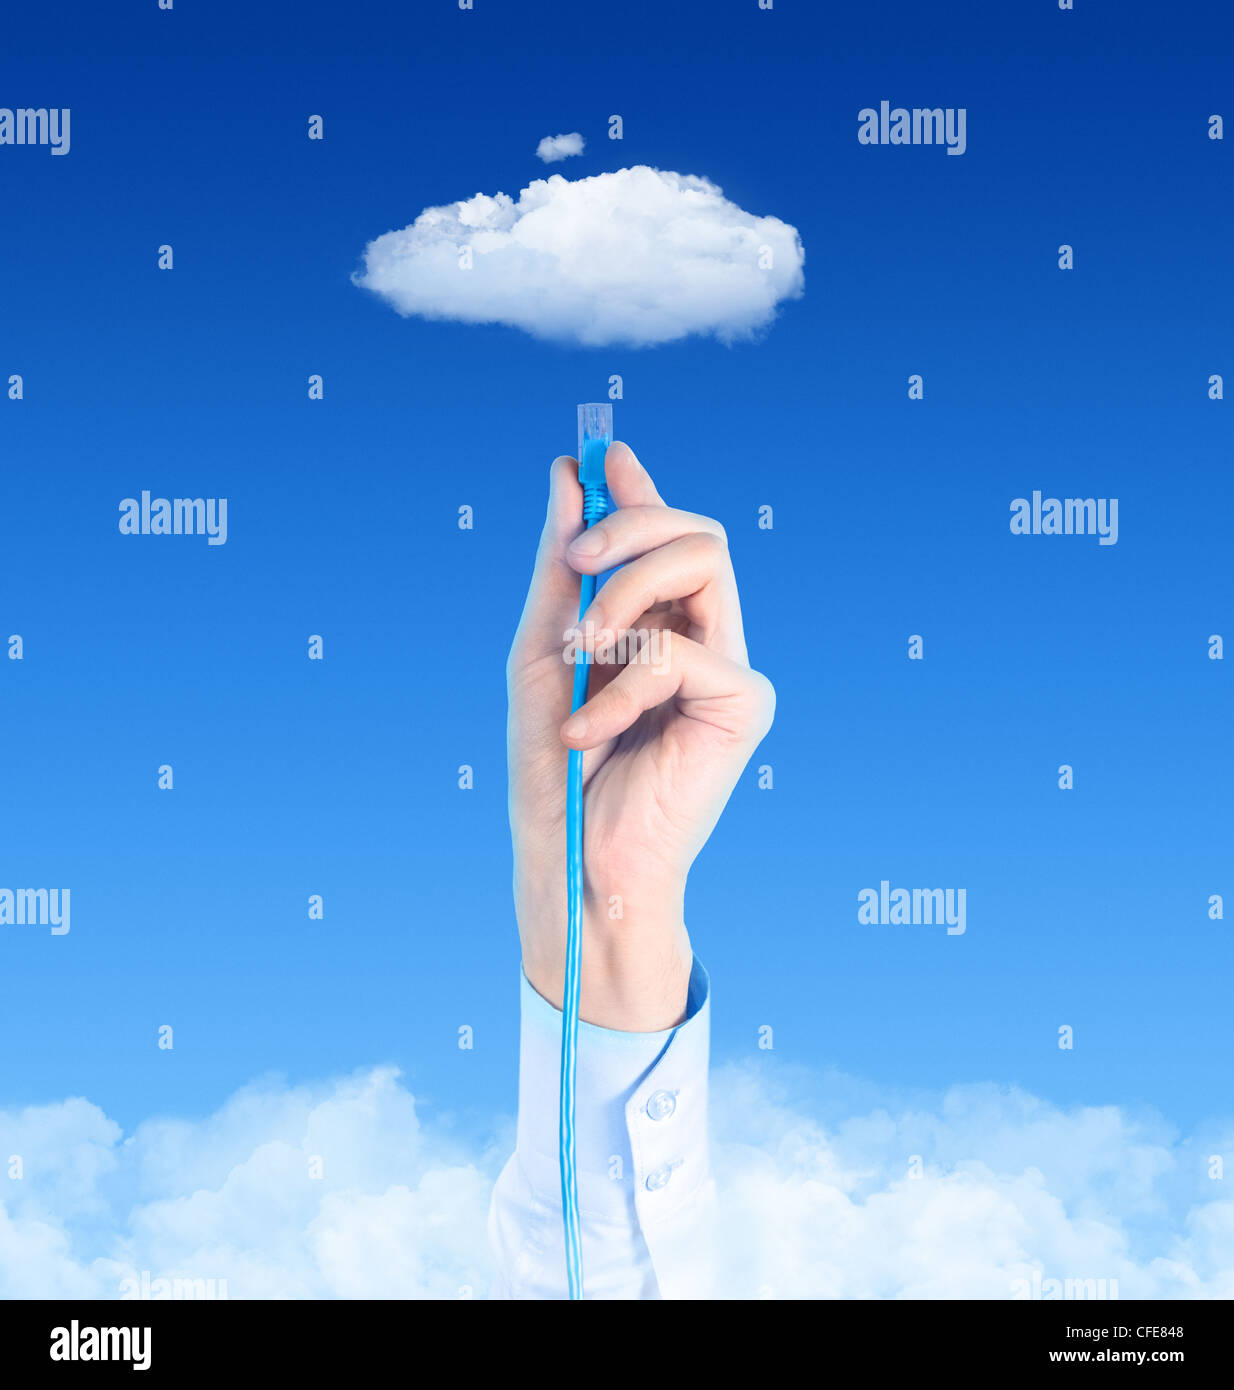 Hand with the cable connected to the cloud. Conceptual image on cloud computing theme. Stock Photo